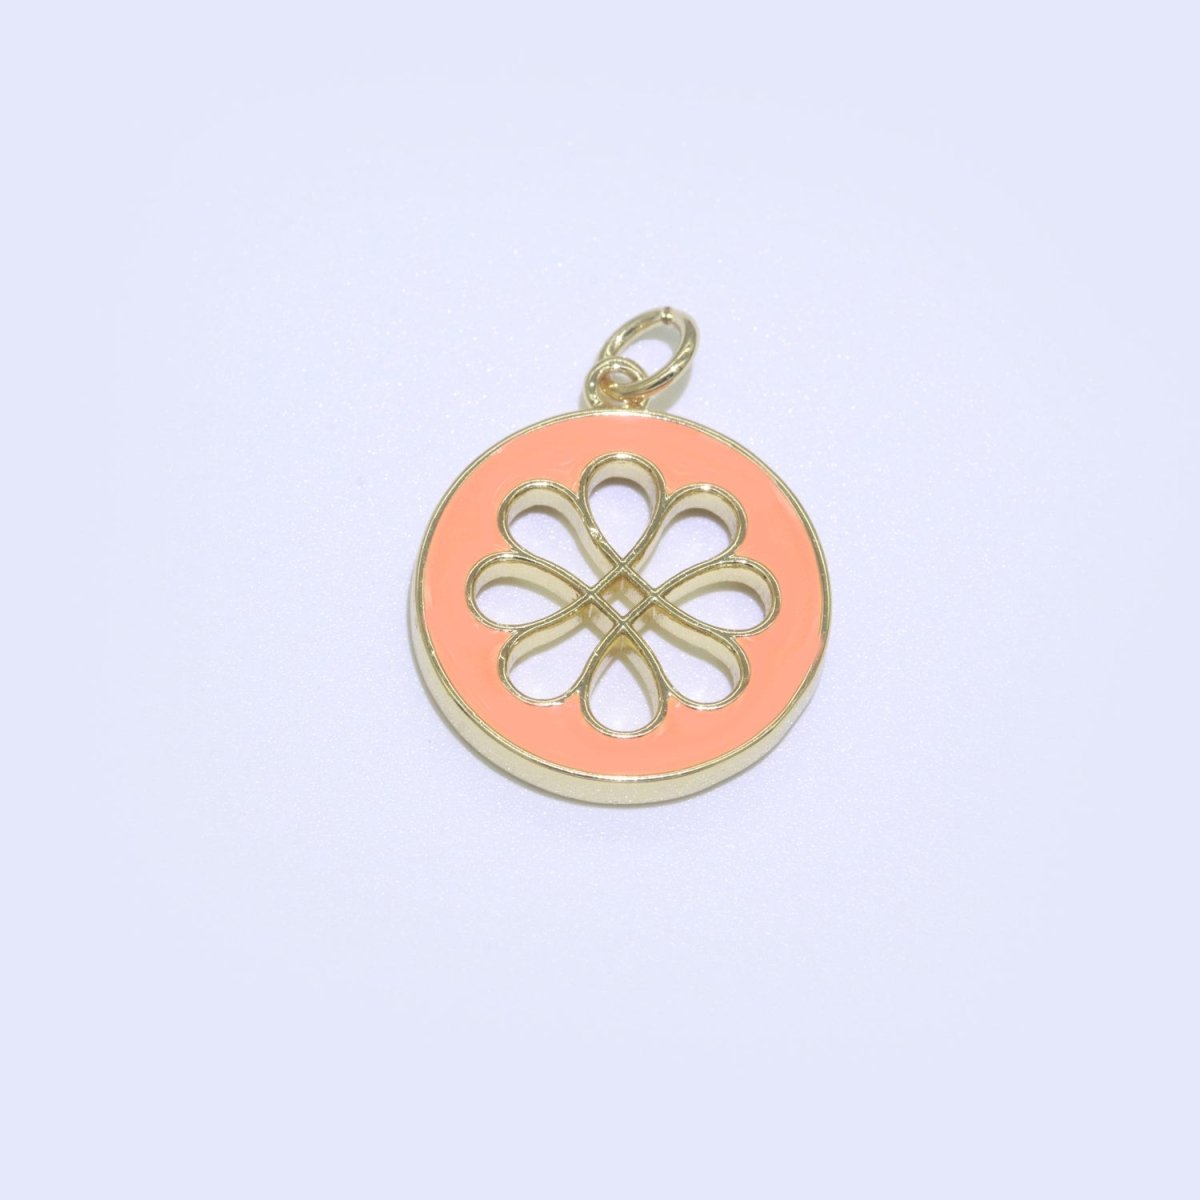 Enamel Daisy Charm 24k Gold Filled Hollow Round Charm Gold Floral Charms, Dainty Flower Pink, Teal, White, Yellow Green Pendant M-393 - M-402 - DLUXCA